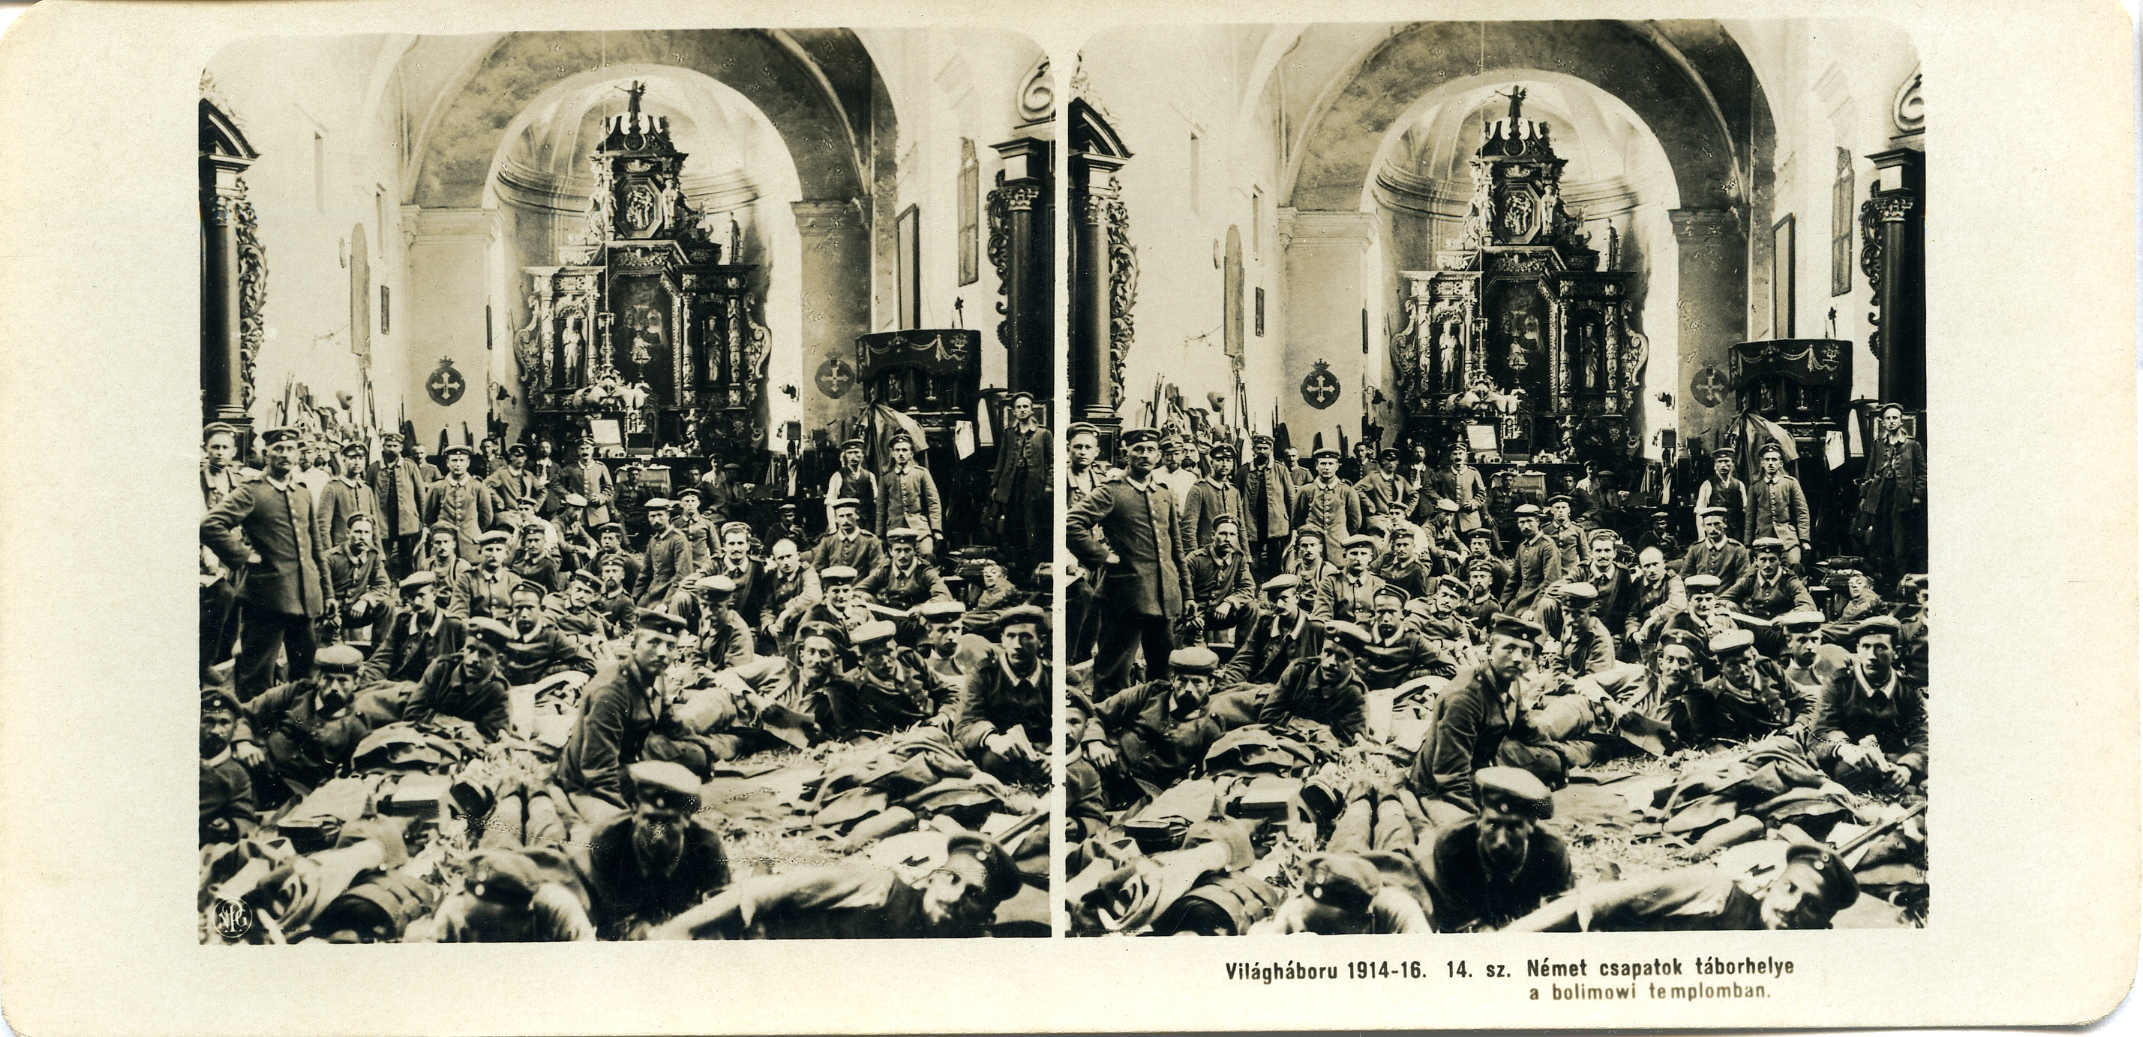 "Quartier unserer Truppen in der Kirche von Bolimow. I." - Our troops' quarters are in the Bolimow church. I.